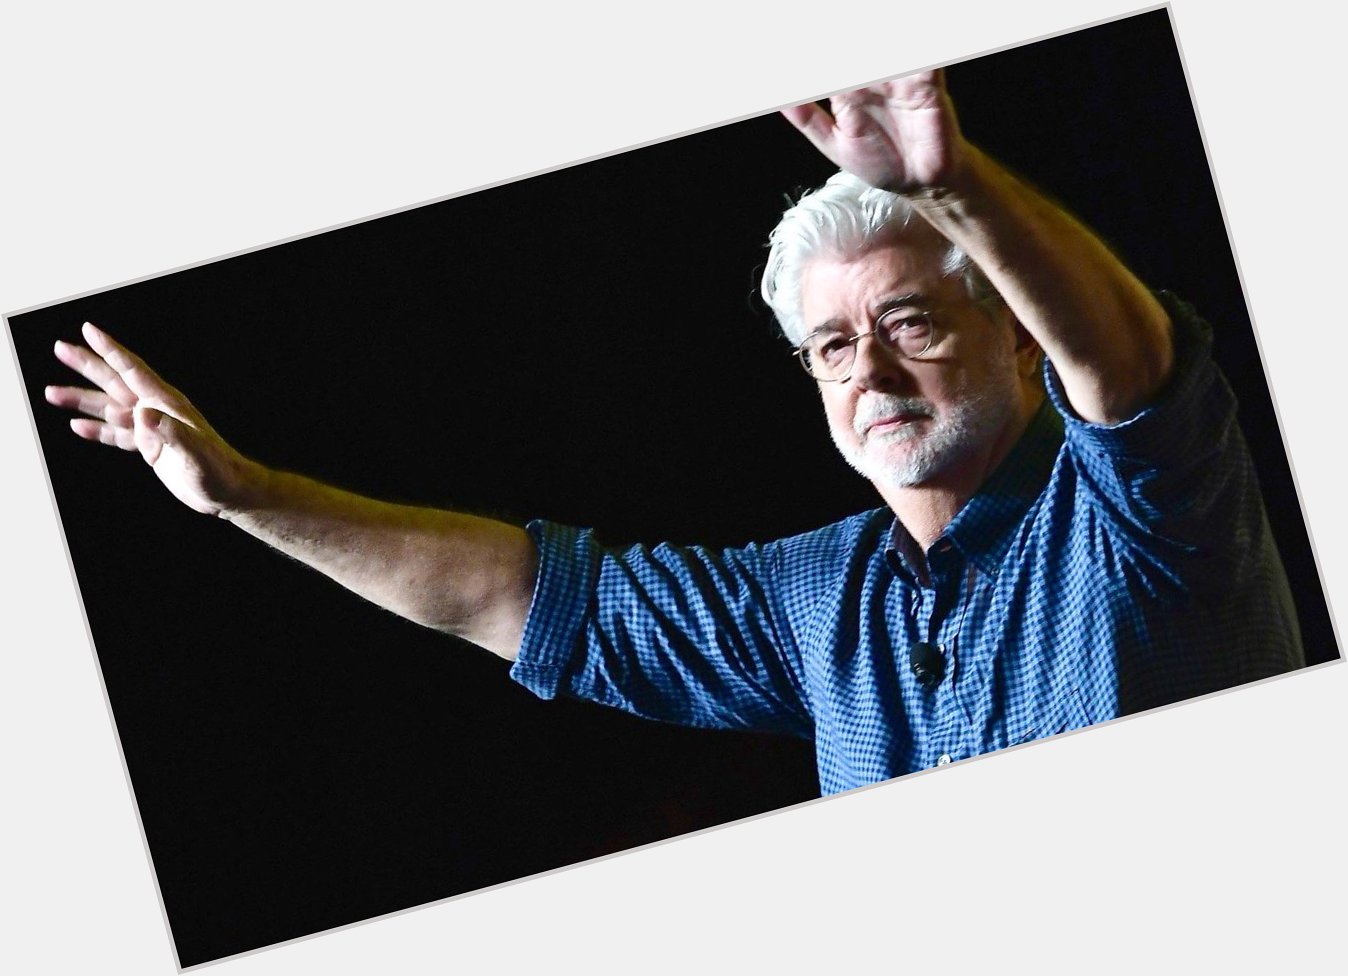 HAPPY BIRTHDAY to George Lucas May the force be with you     